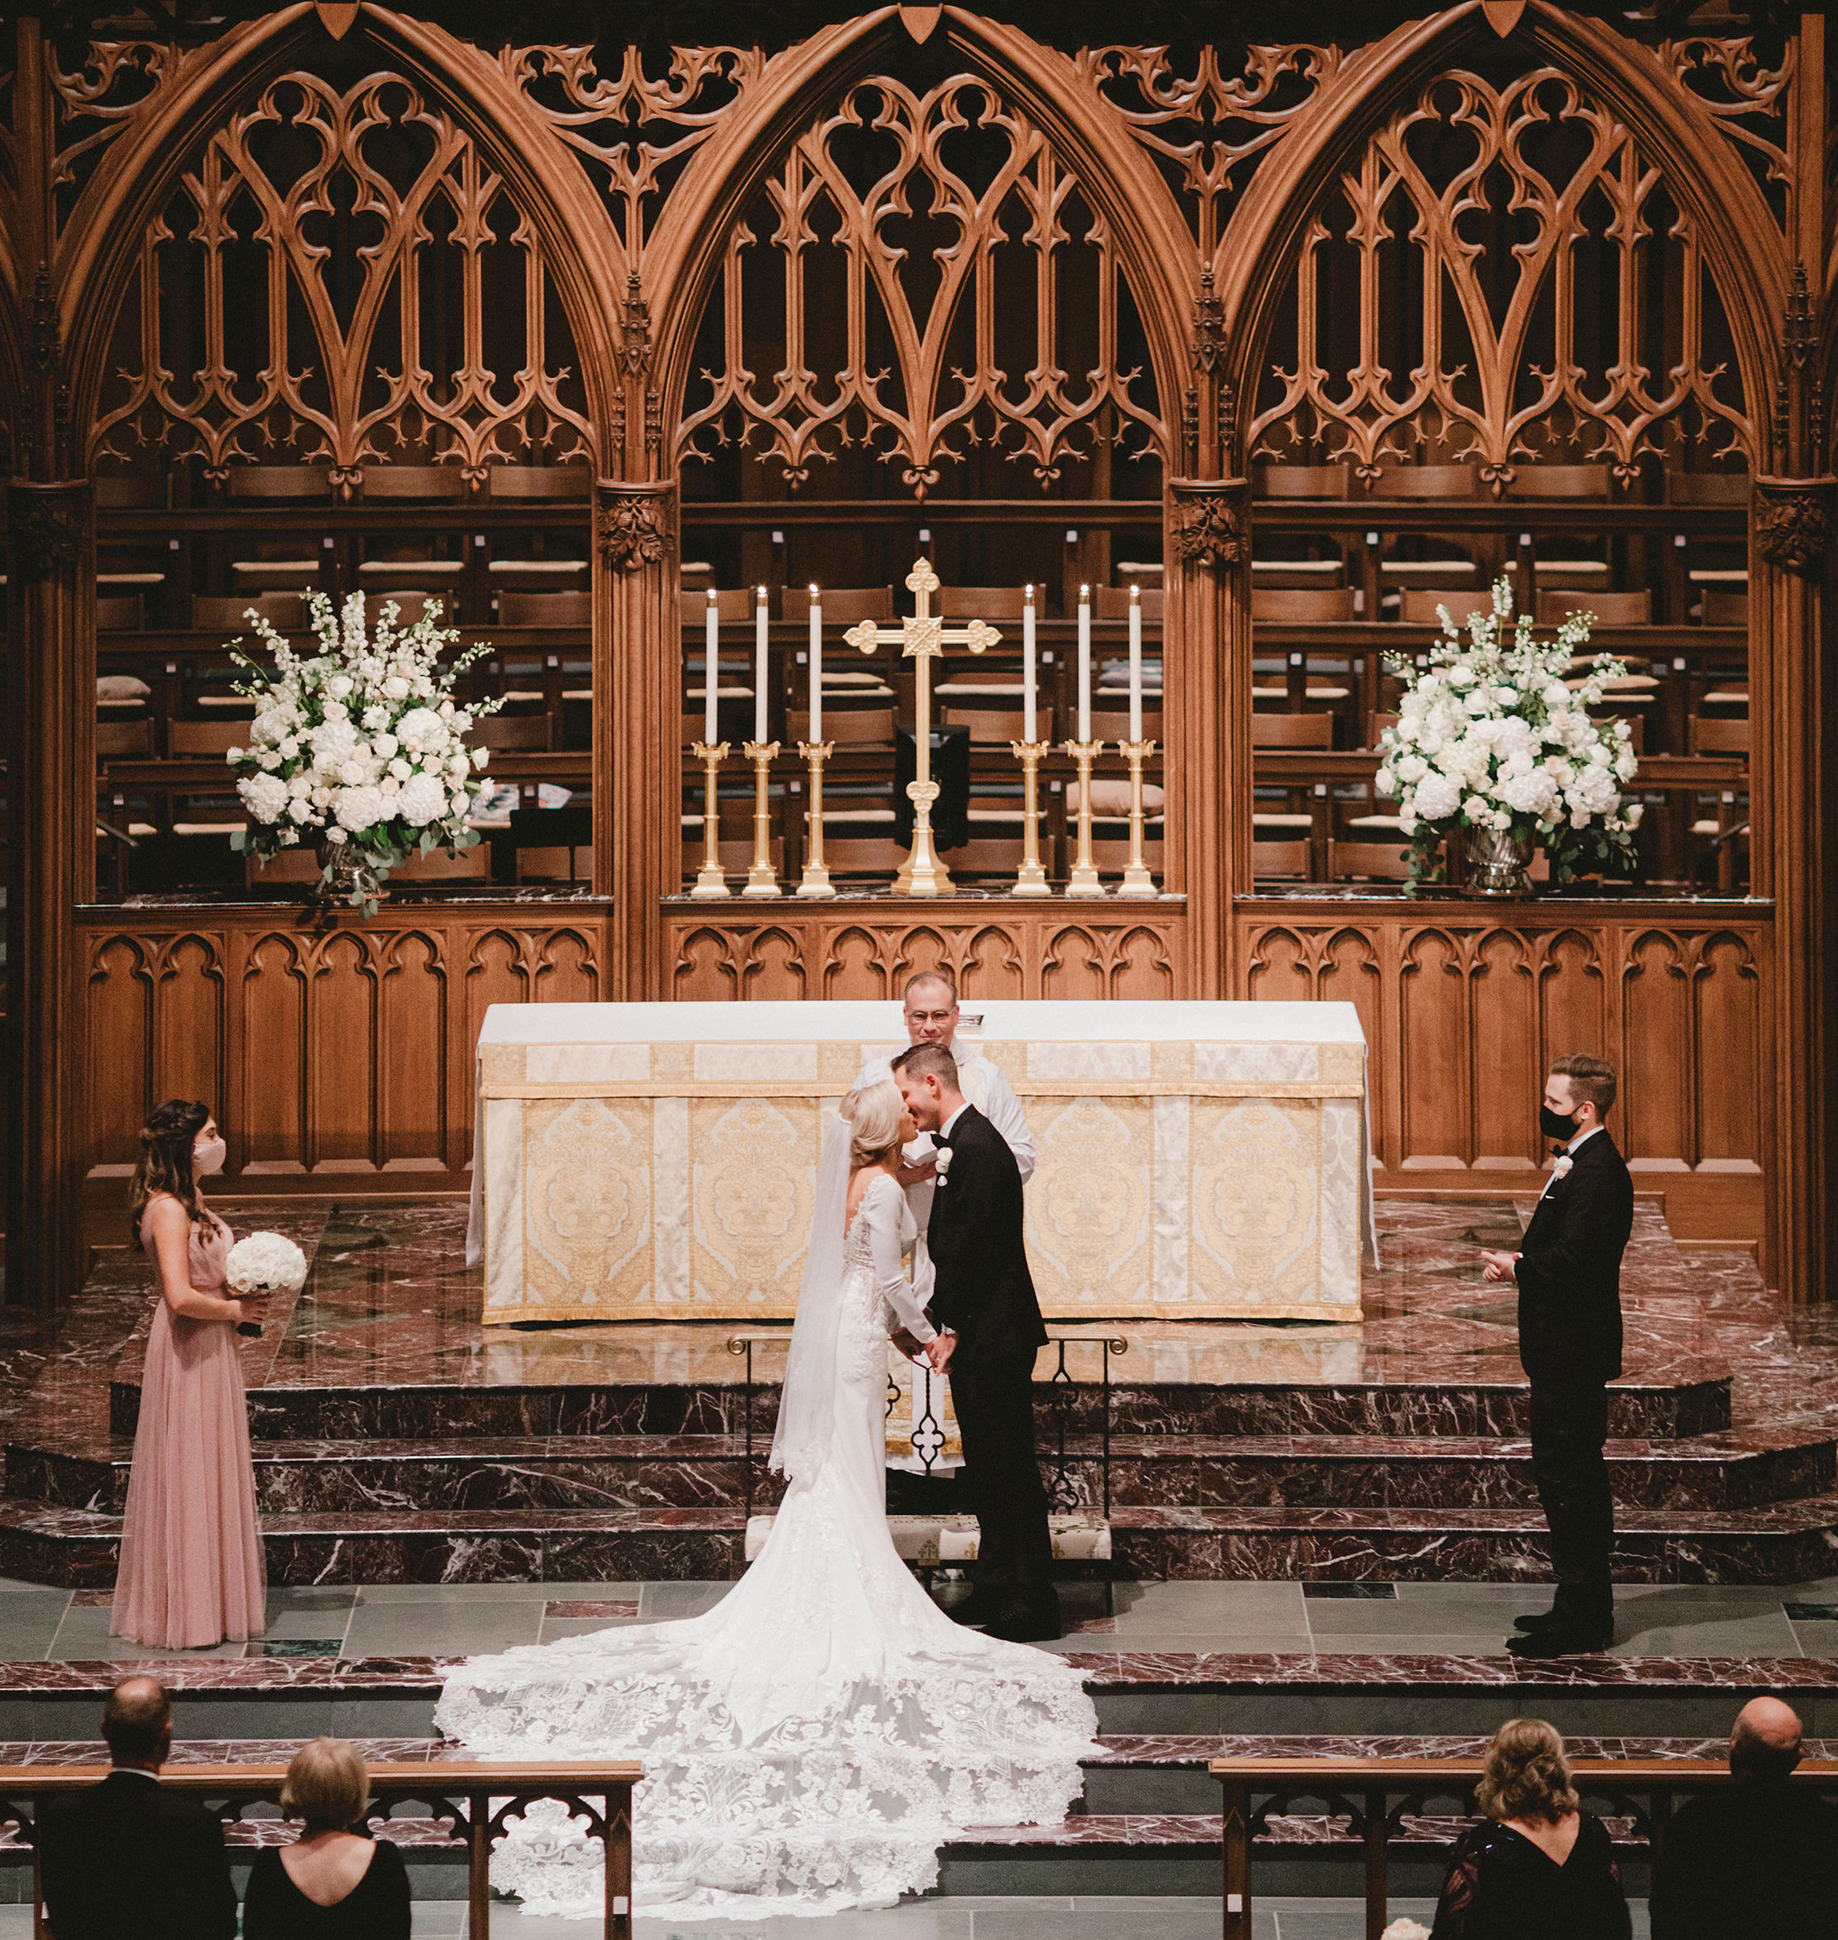 A bride and groom kiss at the altar during their wedding ceremony in Houston.